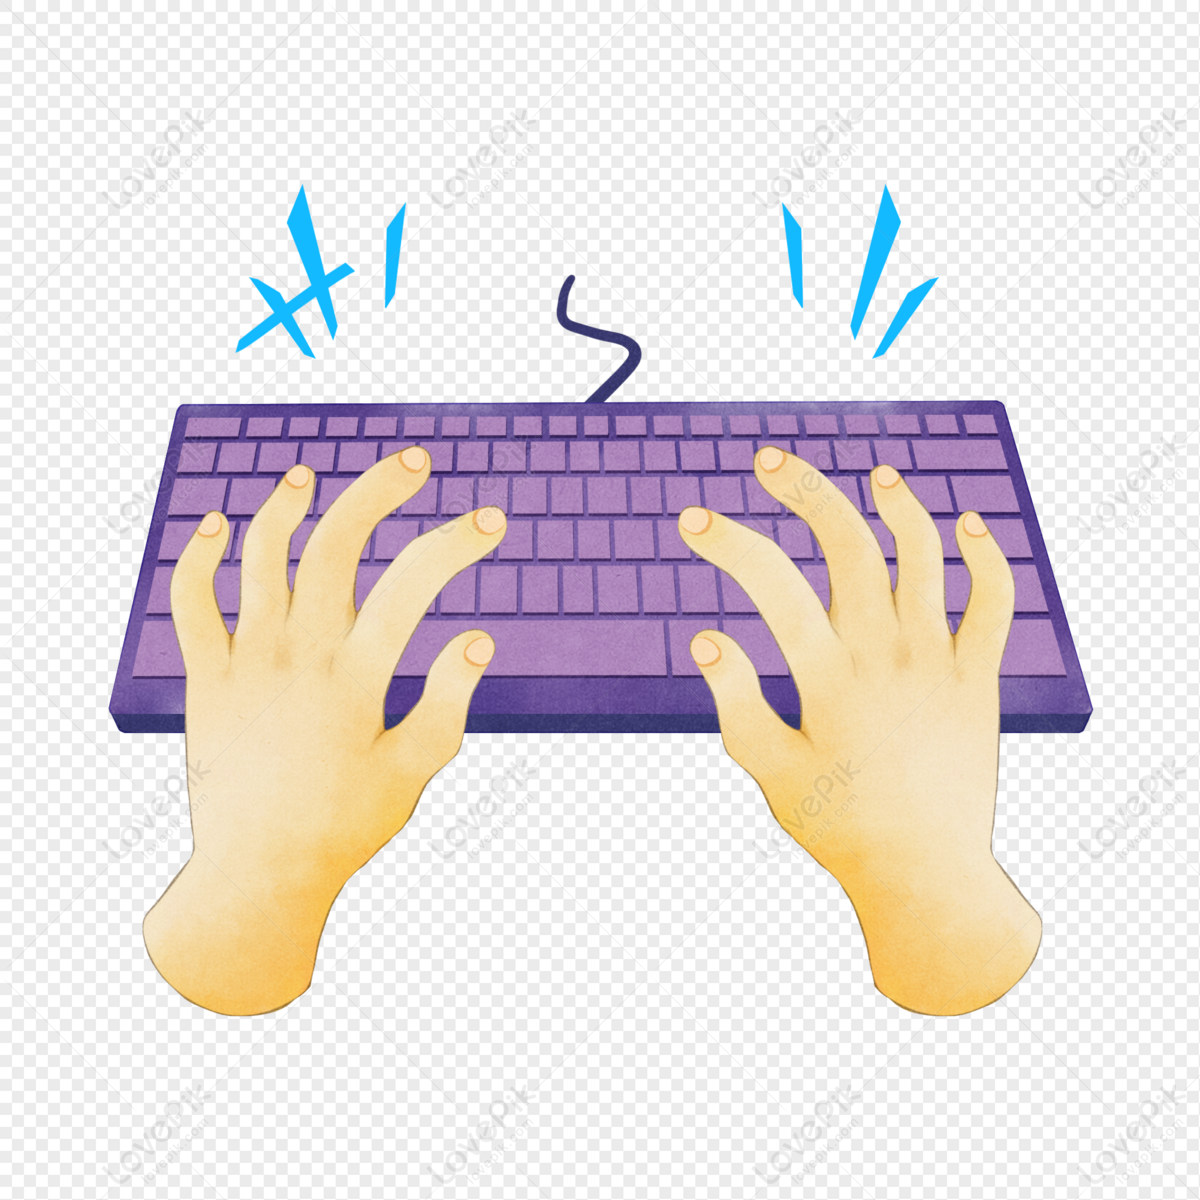 Tablet Computer Keyboard Pen Drawing Stock Illustration - Download Image  Now - Black And White, Black Color, Clip Art - iStock